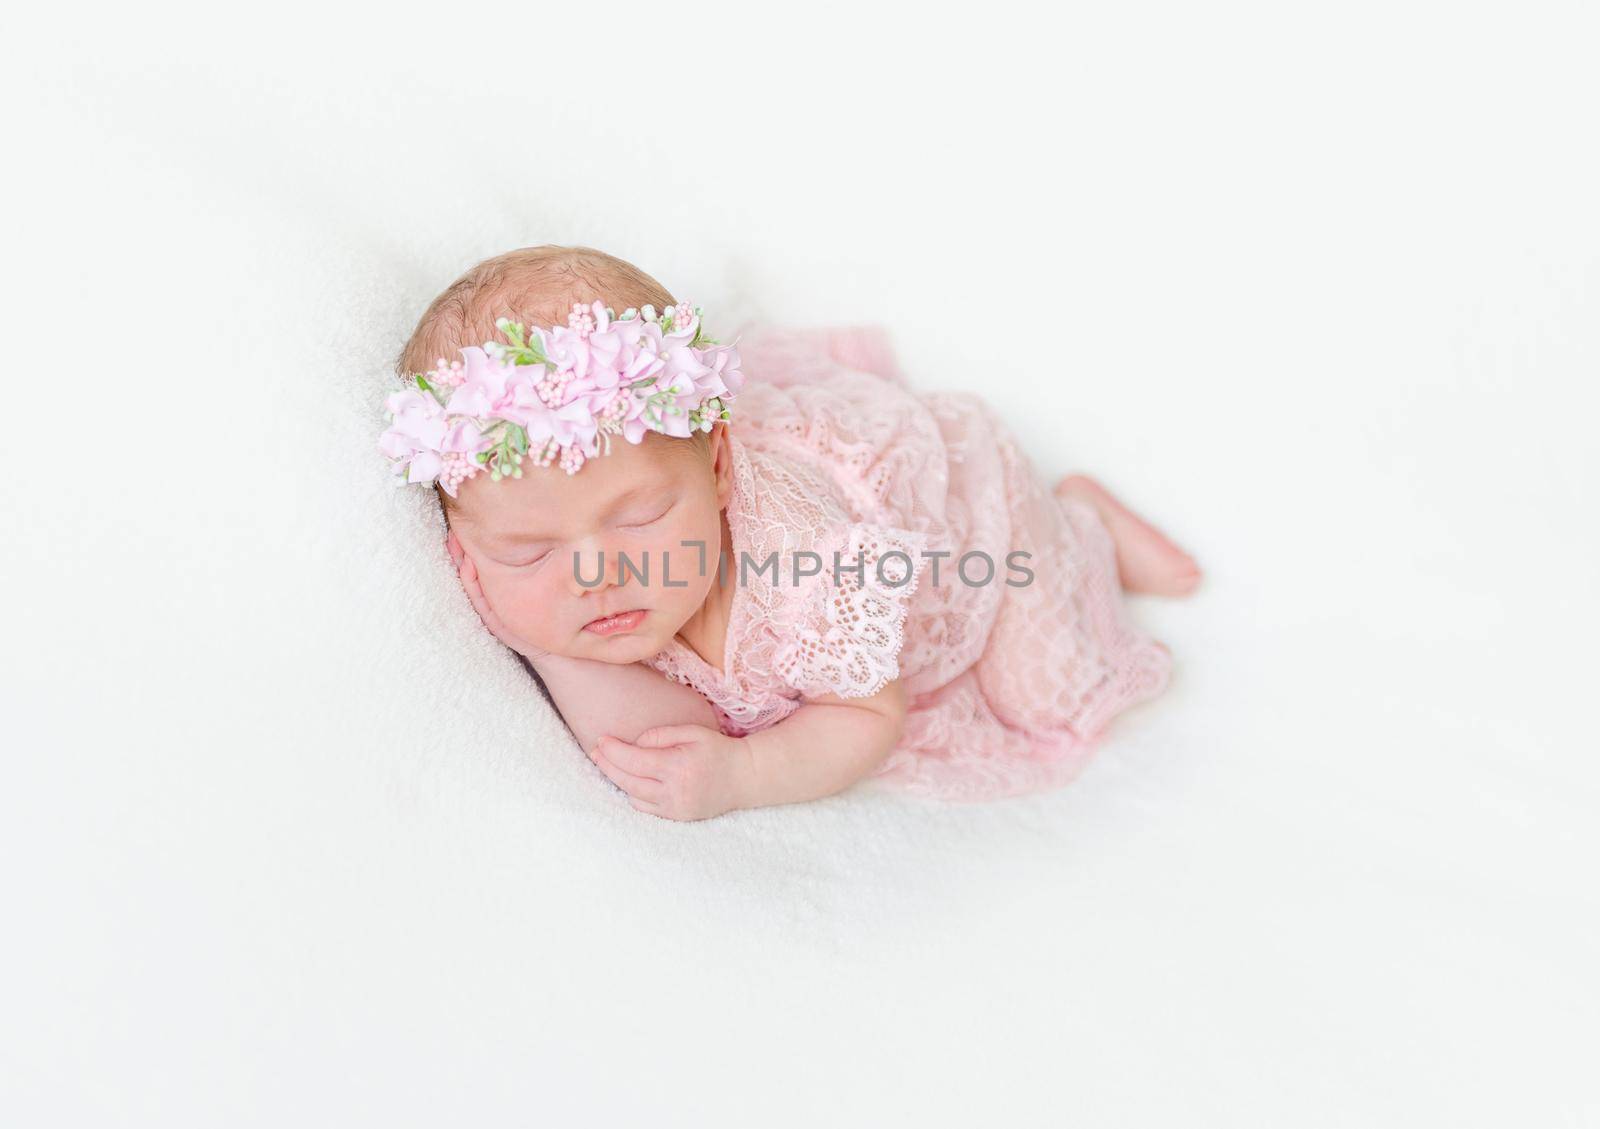 infant dressed in pink laced costume napping tightly by tan4ikk1